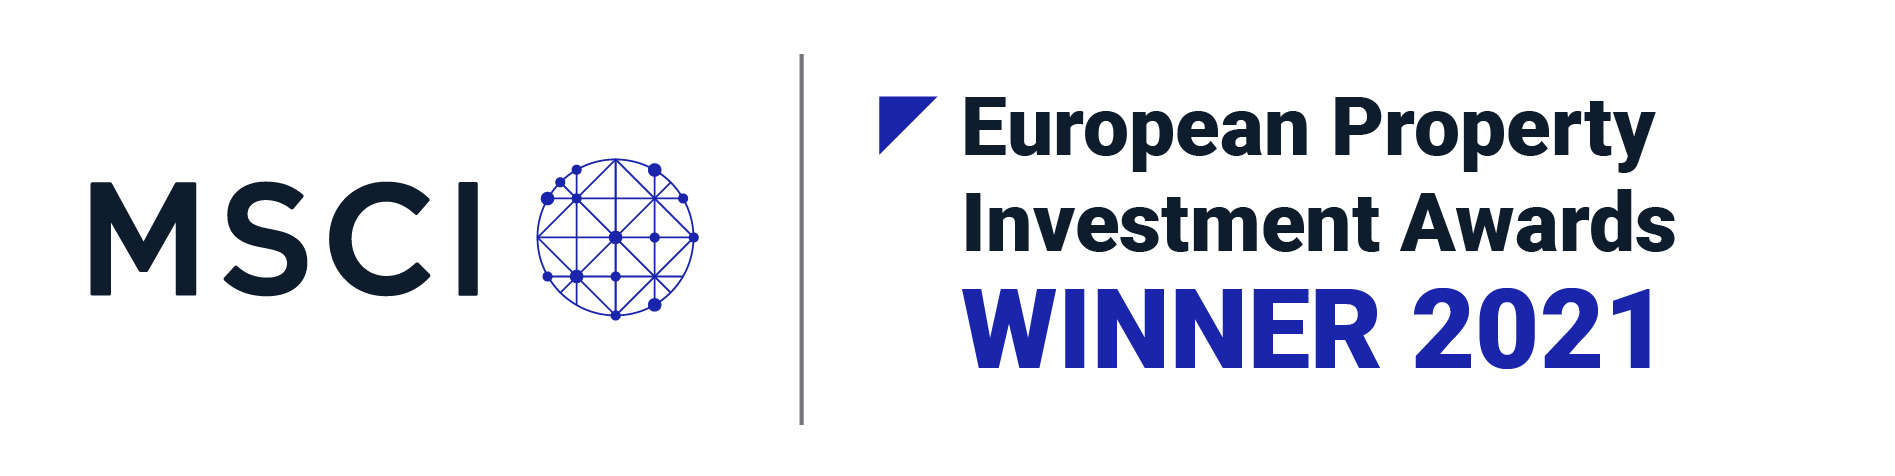 European Property Investment Awards 2021